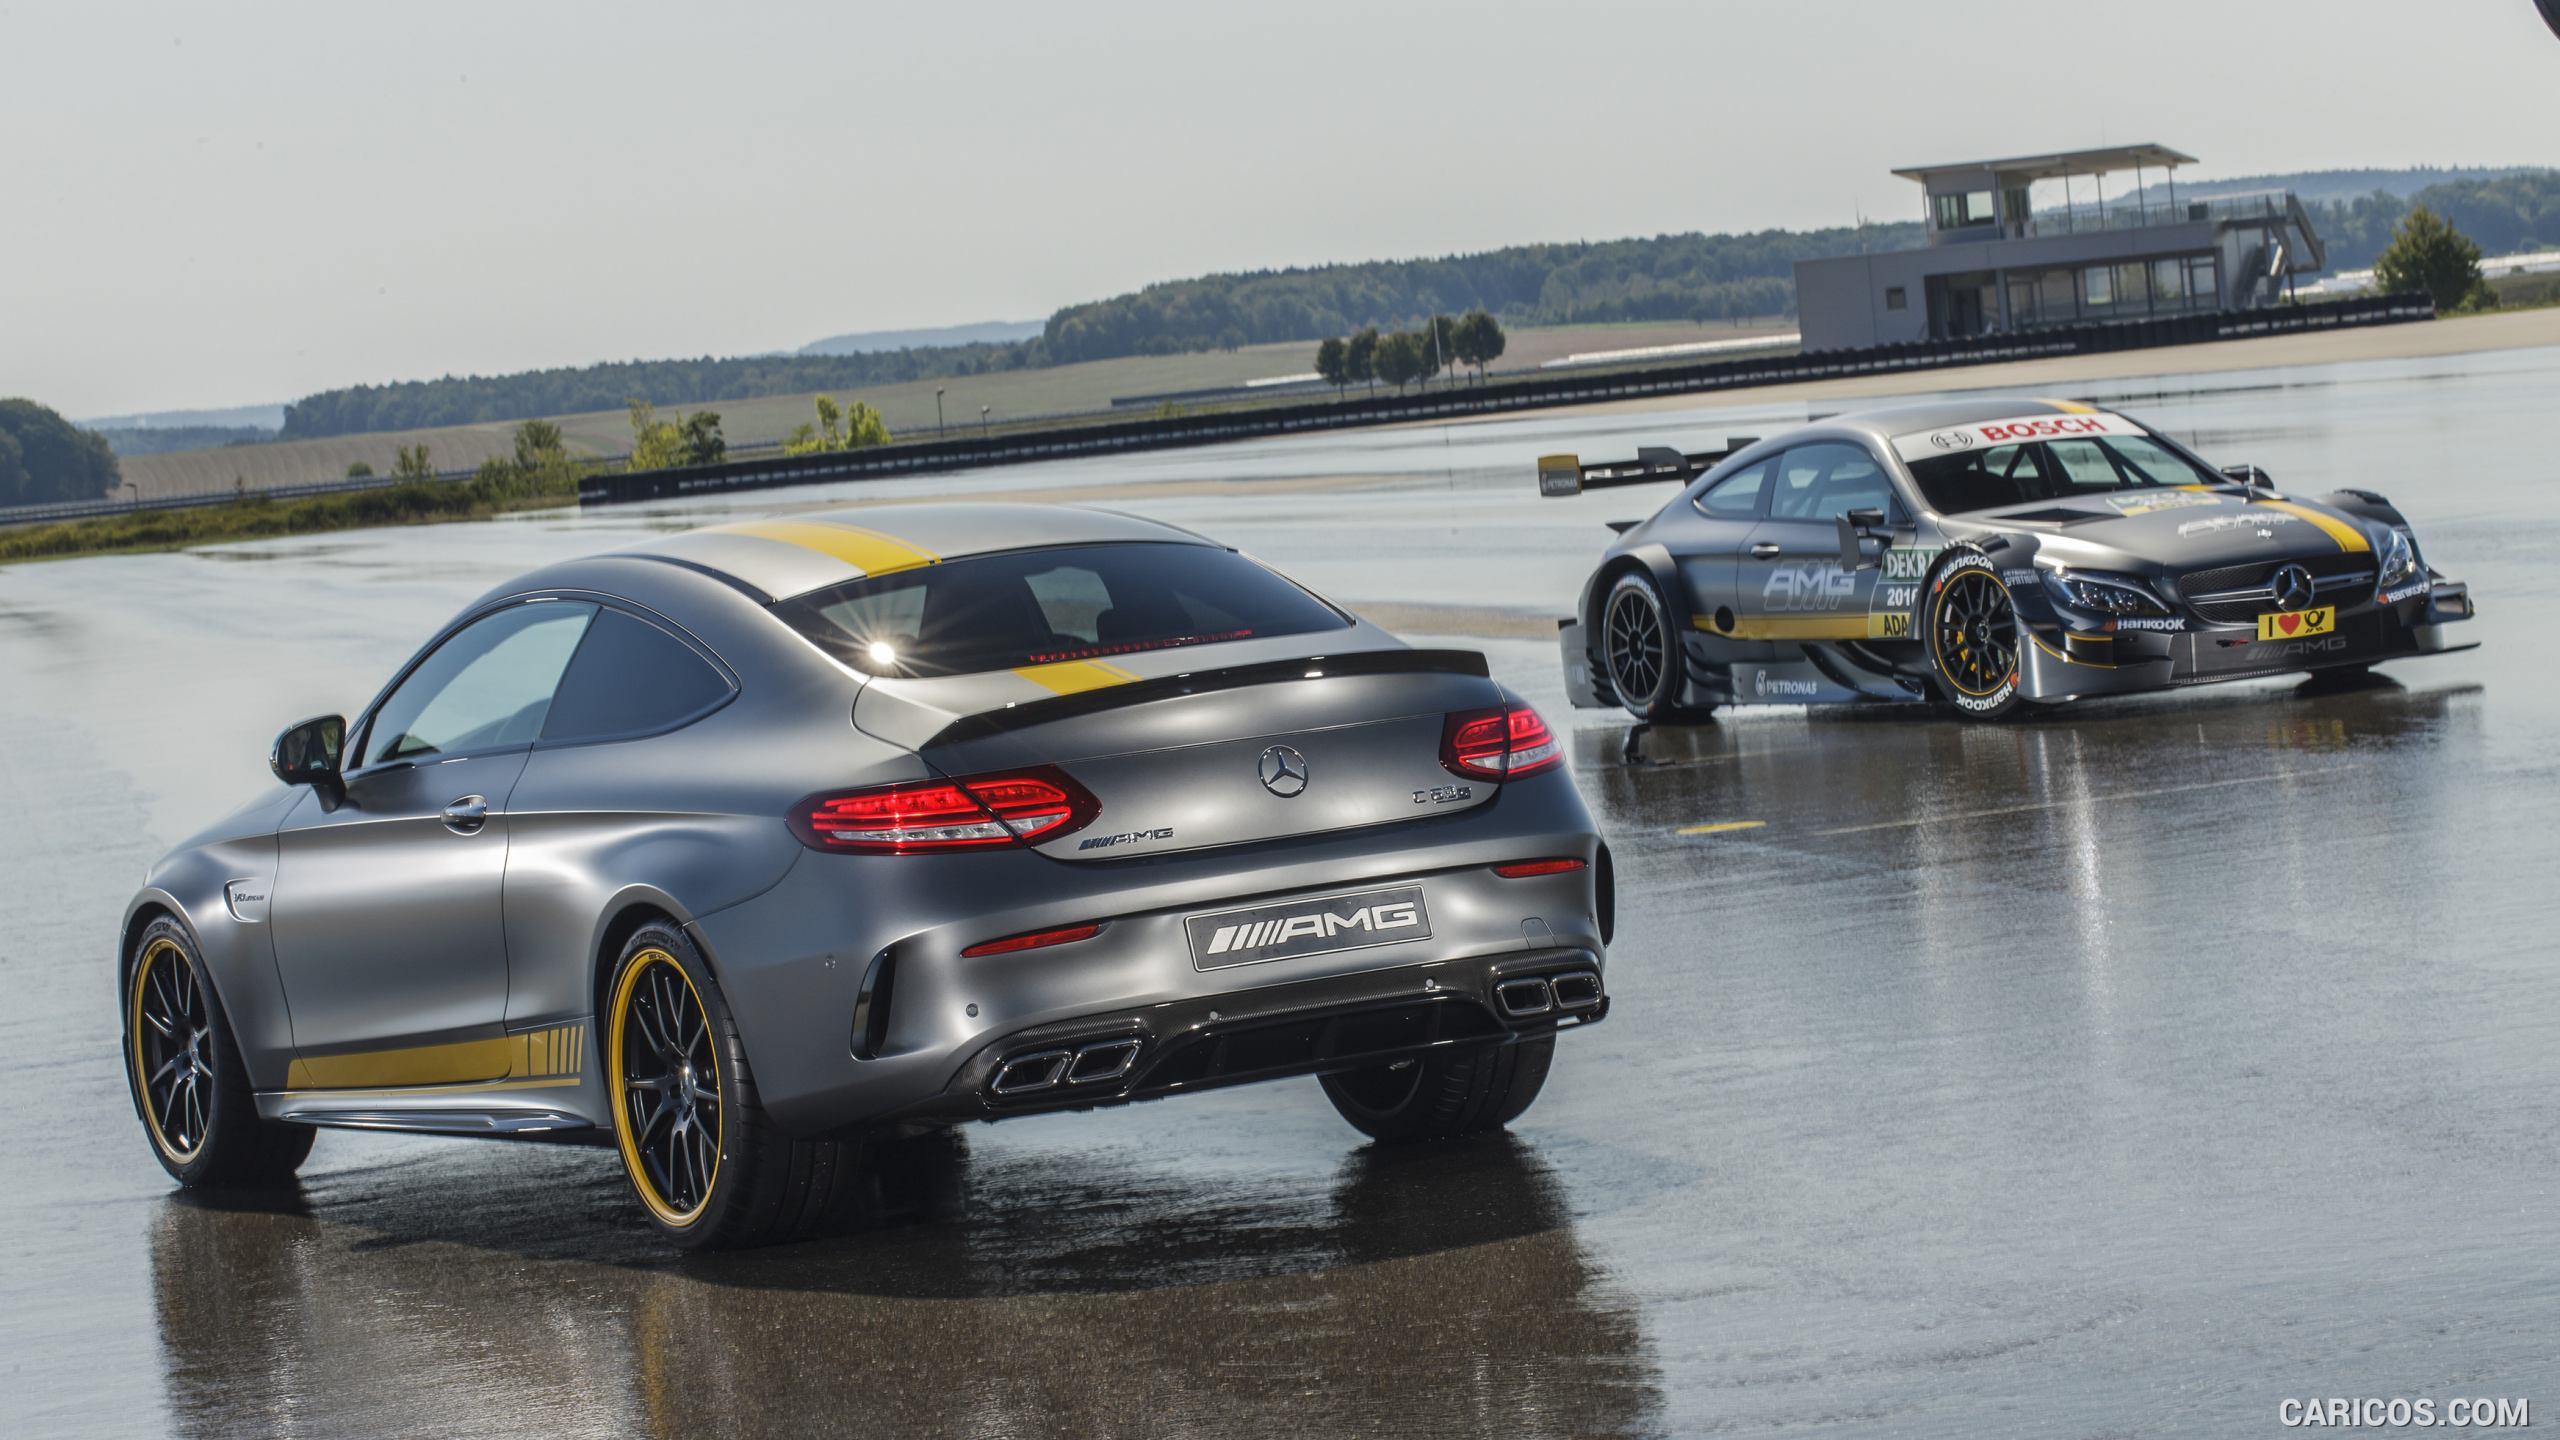 2017 Mercedes-AMG C63 Coupe Edition One and Mercedes-AMG DTM - Rear, #3 of 86